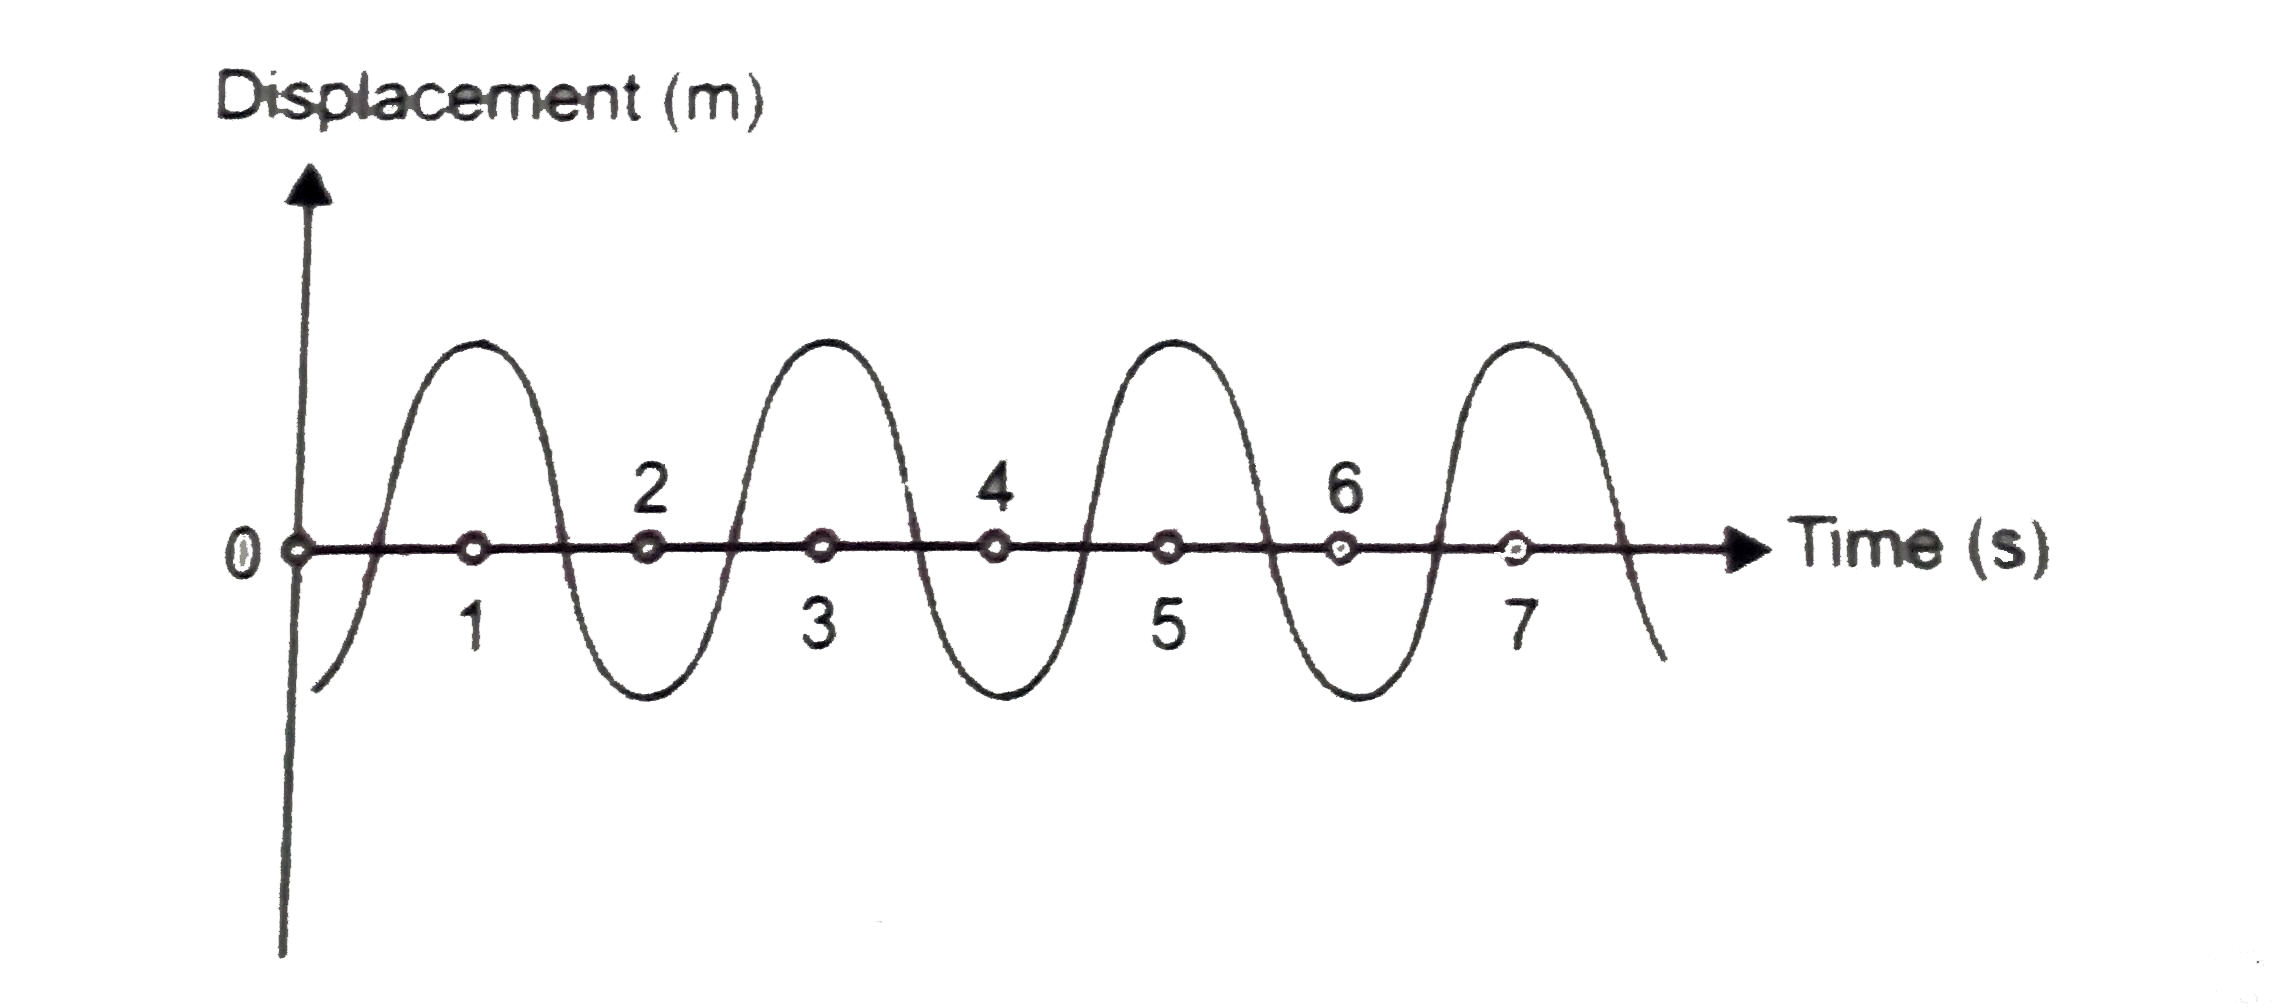 the displacement veres time relation for a disturbance travelling with a velocity of 1500 m//s.   Calcuate the :   (i) time period   (ii) frequency   (iii) wavelength of the disturbance.   .